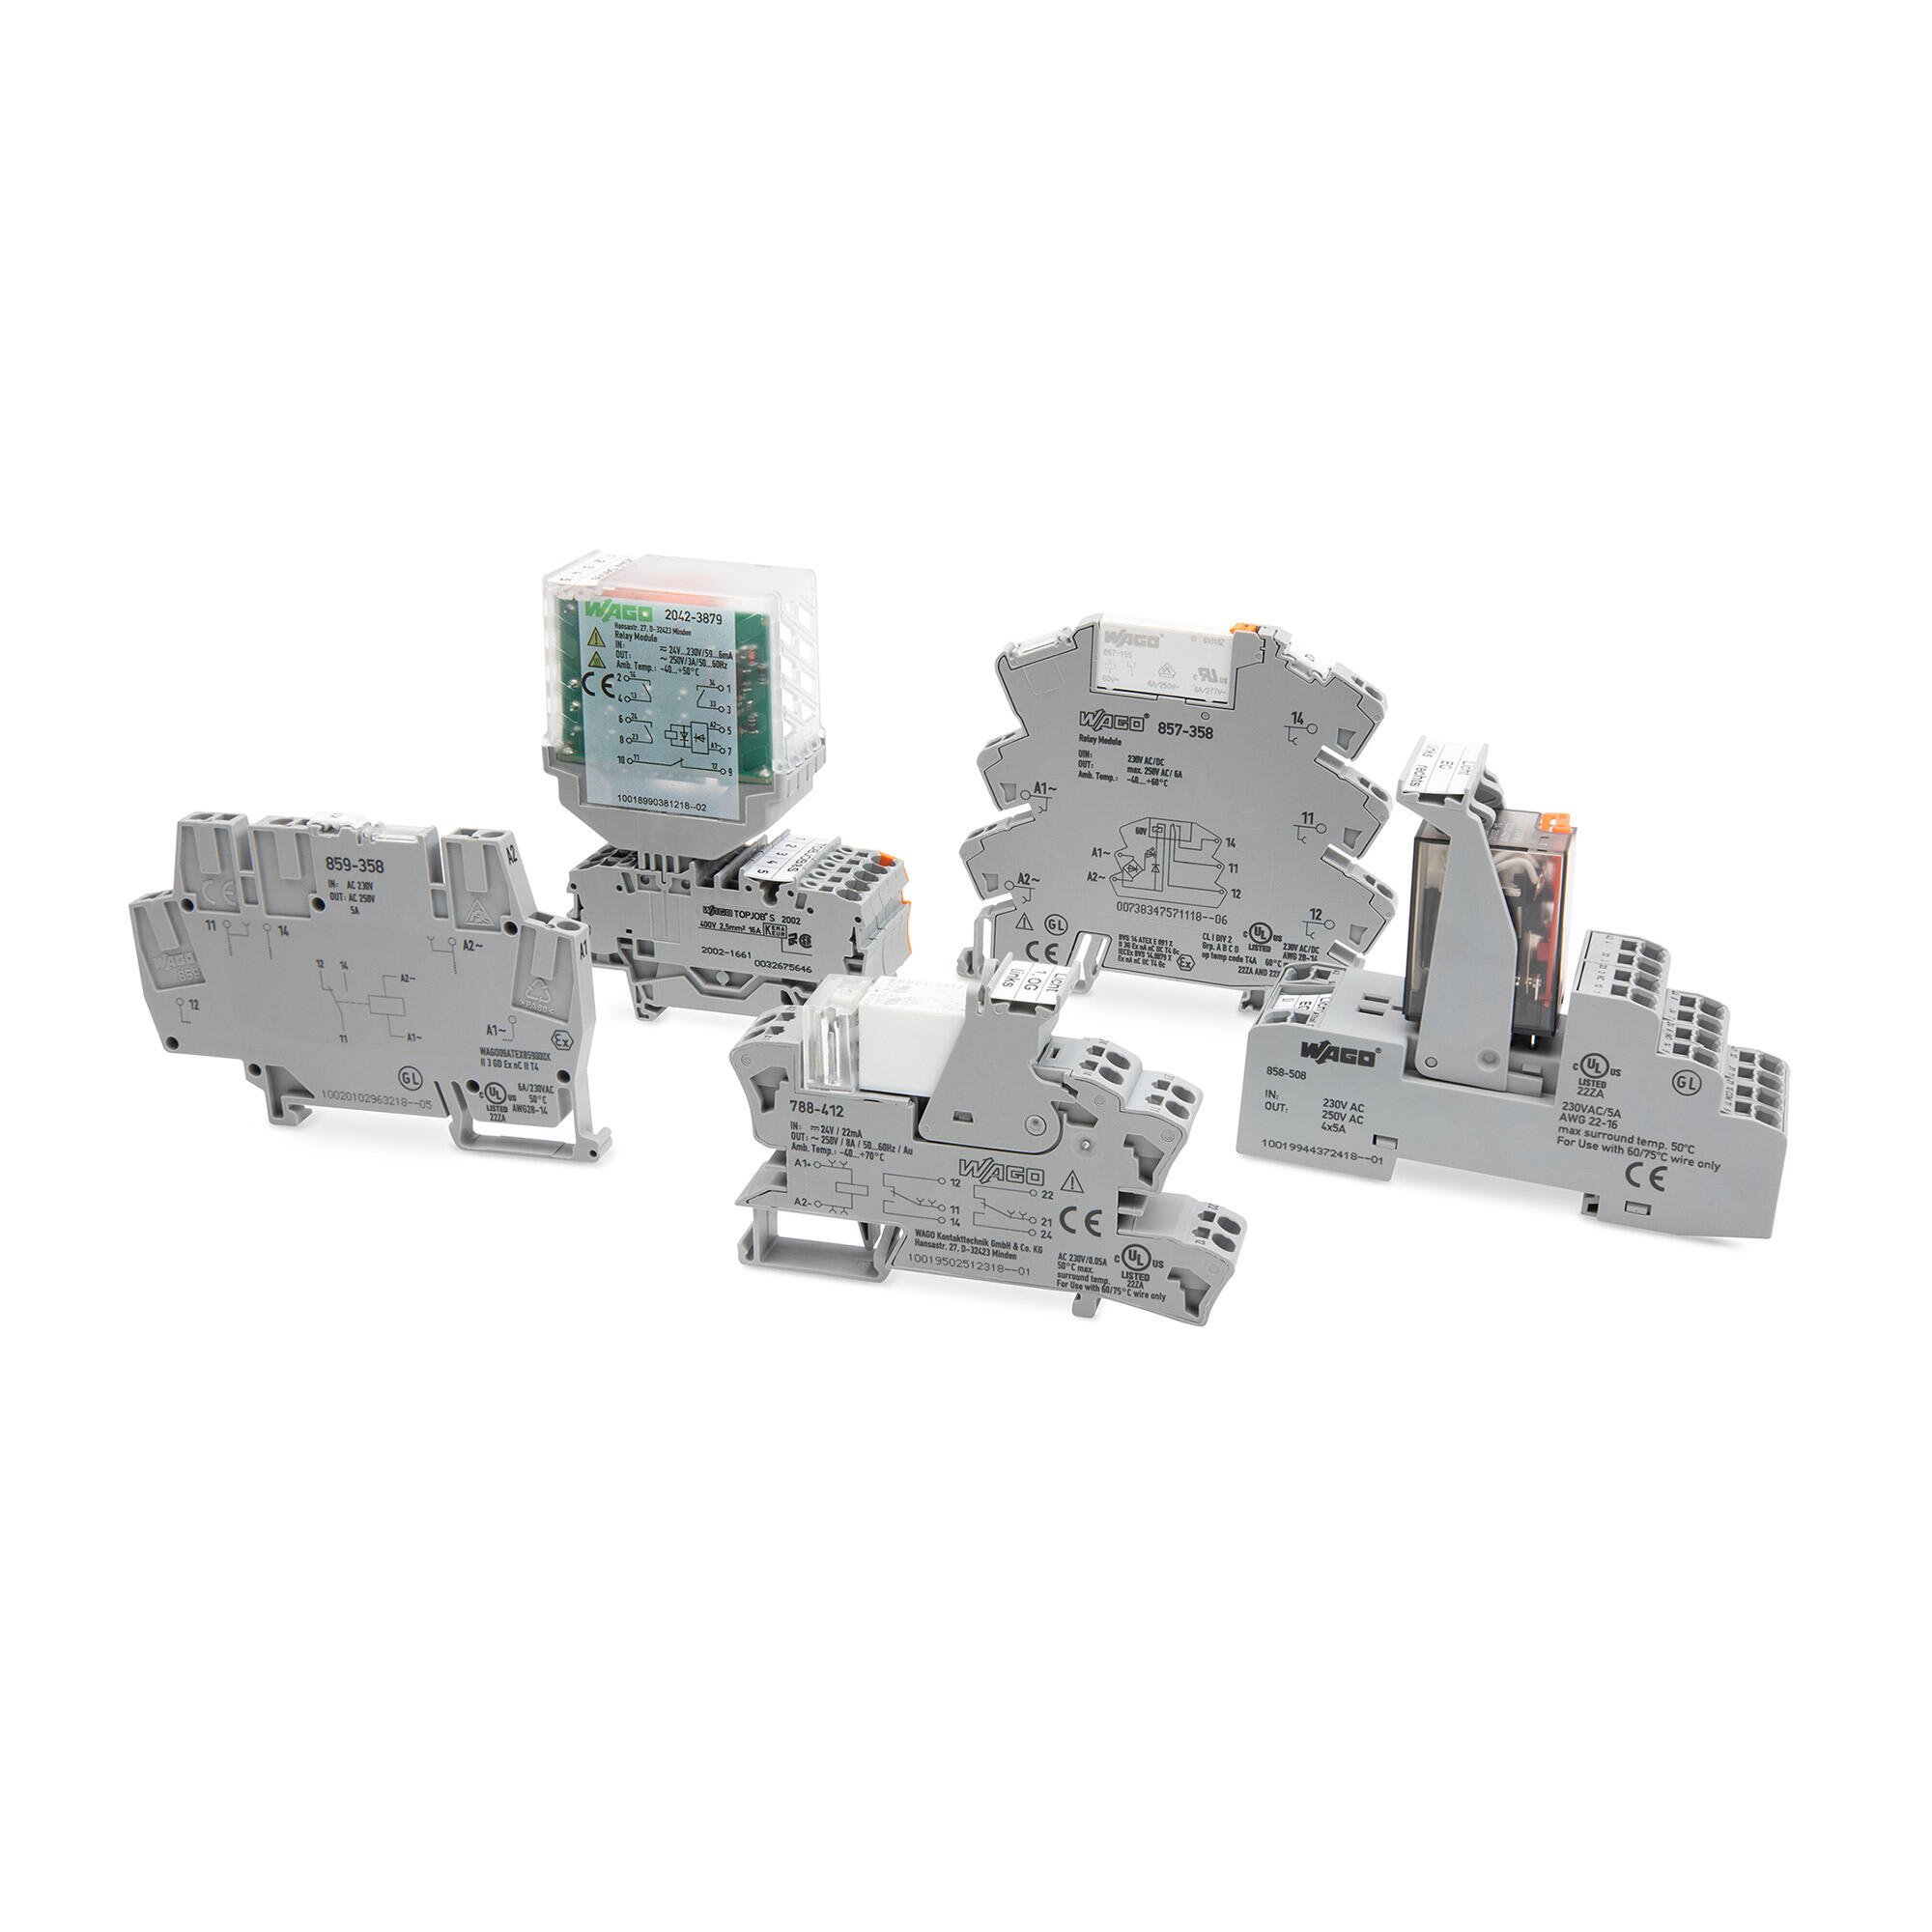 MM-3138  new header relays and optocouplers_2000x2000.jpg